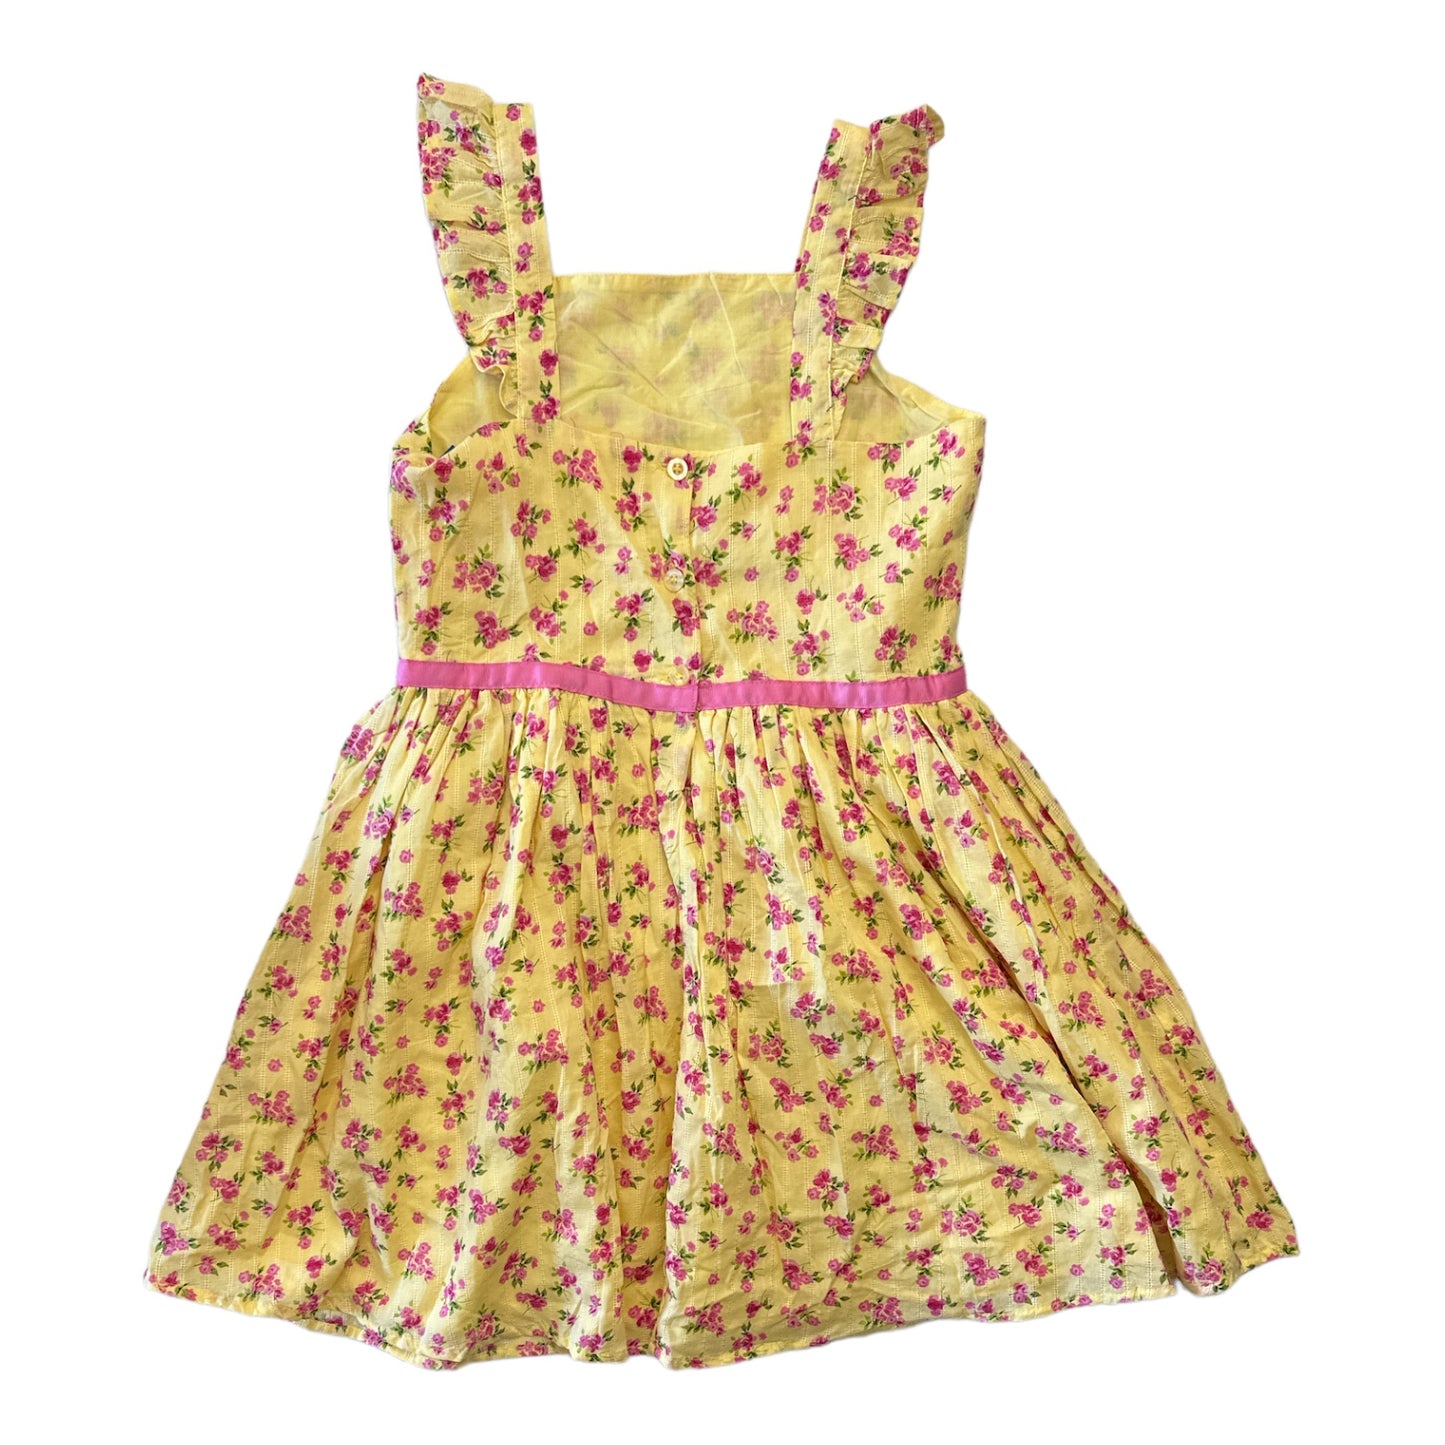 Zunie Girl Girl's Cotton Floral A-Line Any Occasion Knee-Length Dress